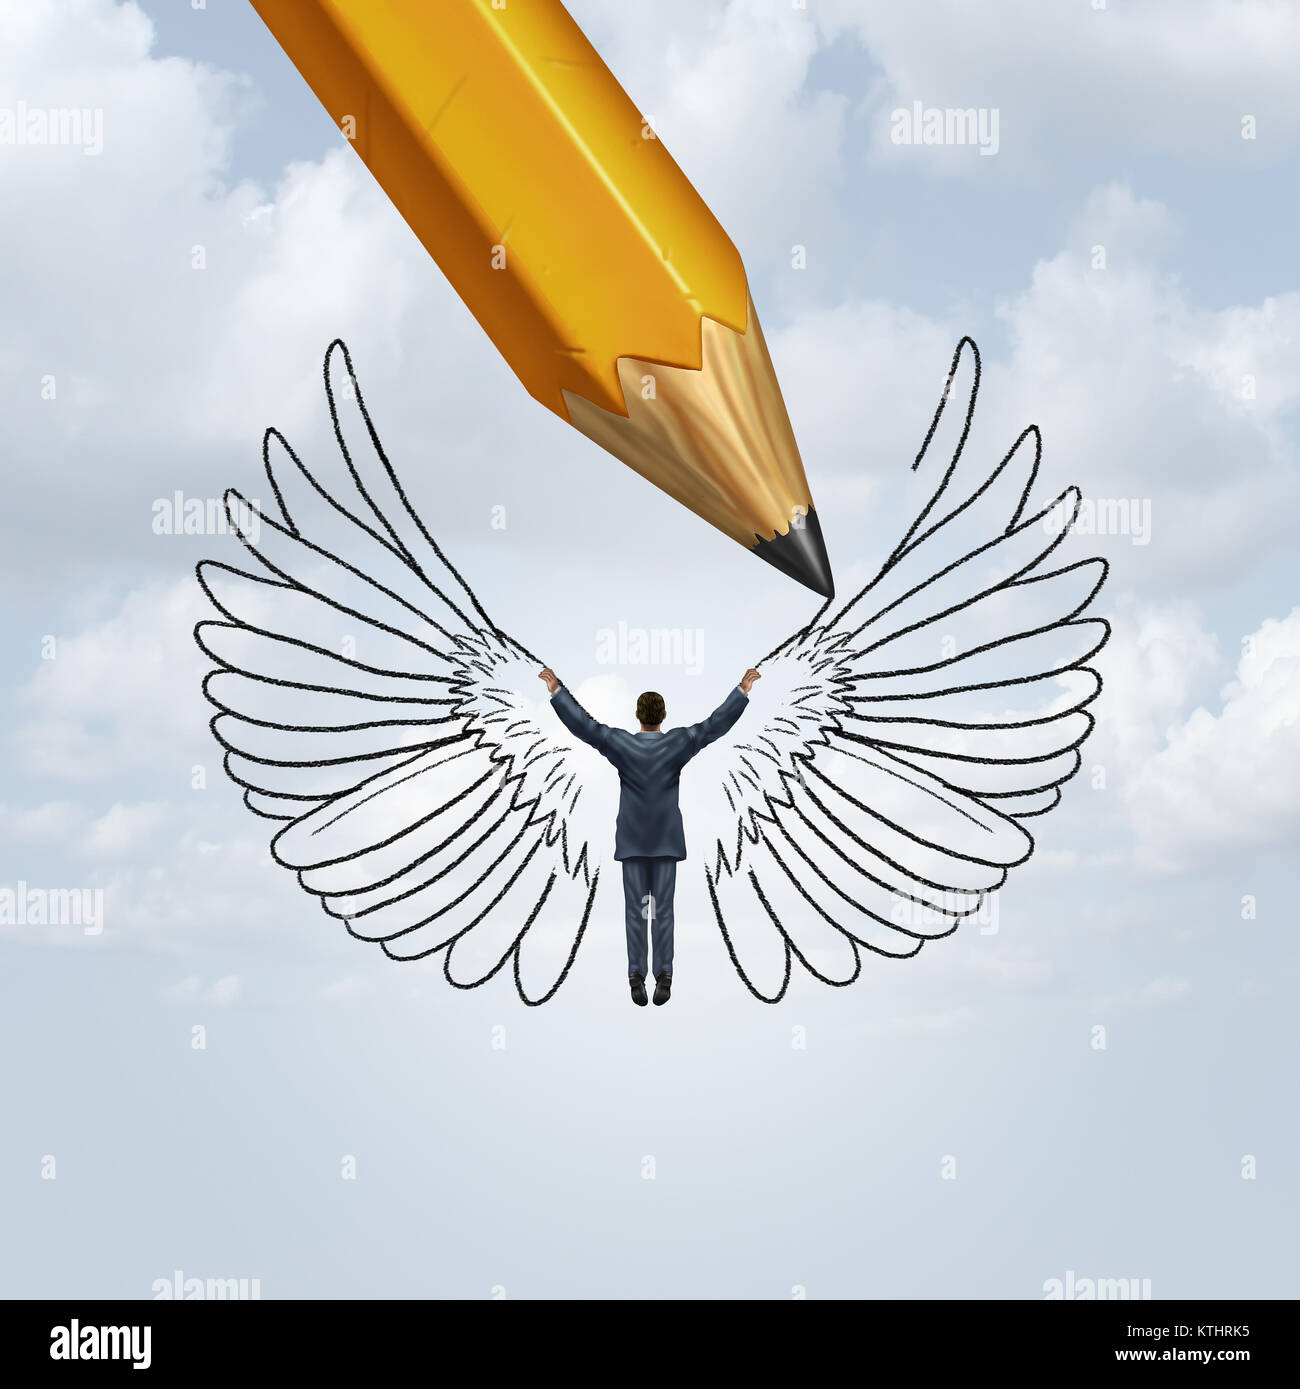 Create success and unlocking human potential as a pencil drawing wings on a person as a metaphor for learning to fly in life. Stock Photo